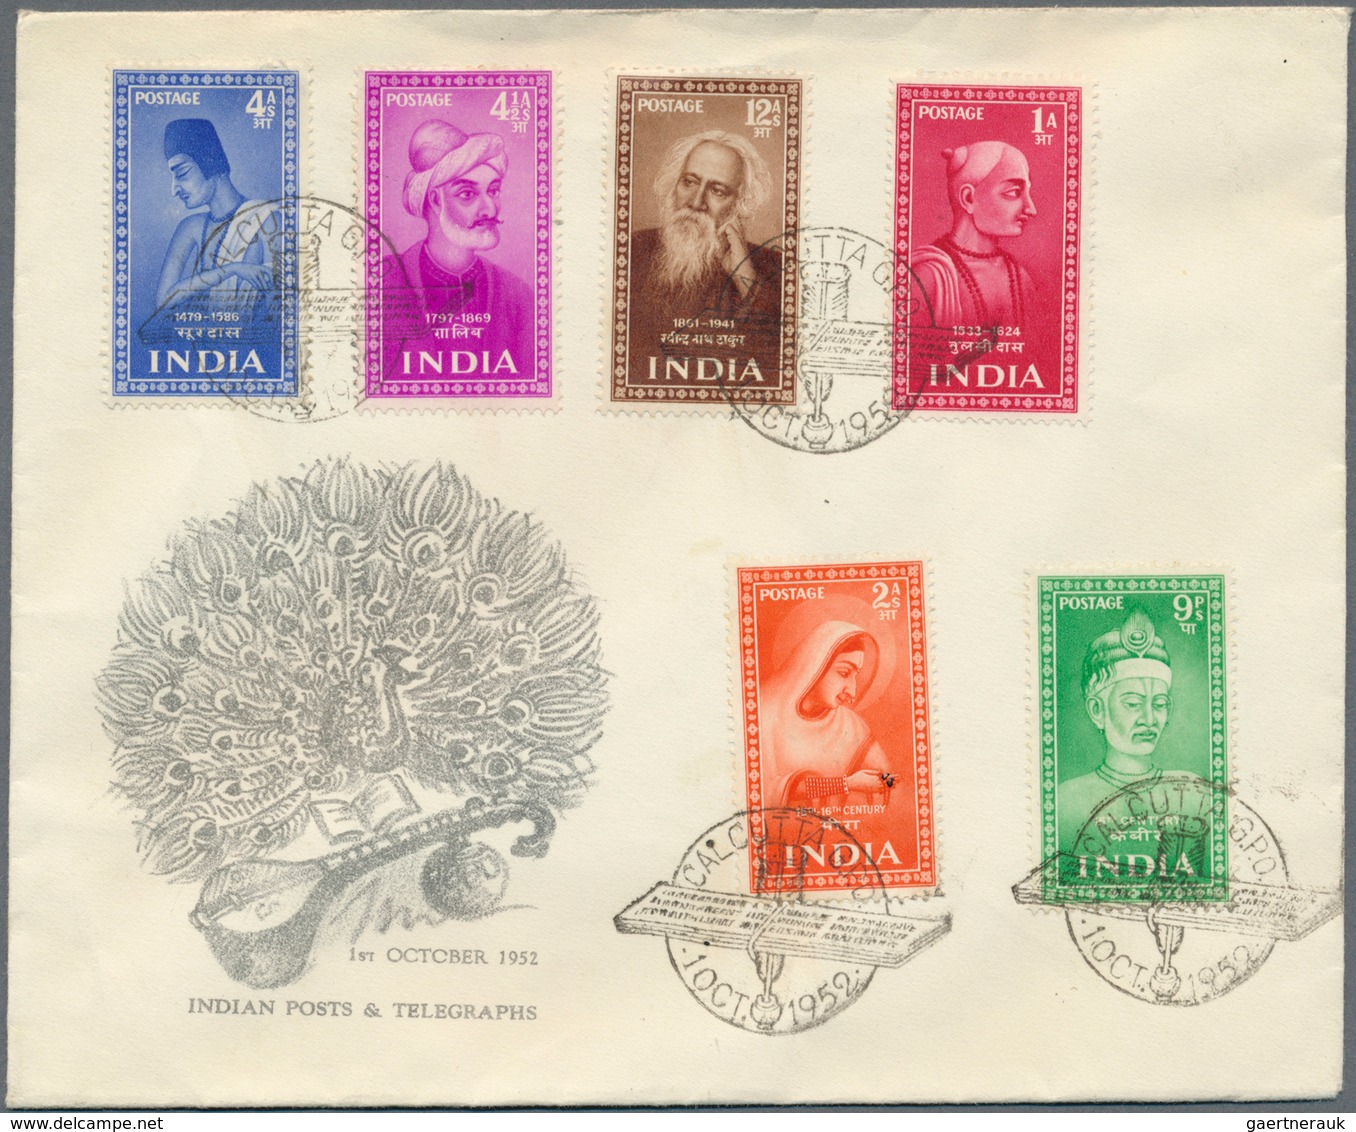 Indien: 1854-1960's: More than 1500 covers, postcards and postal stationery items in 4 albums and a